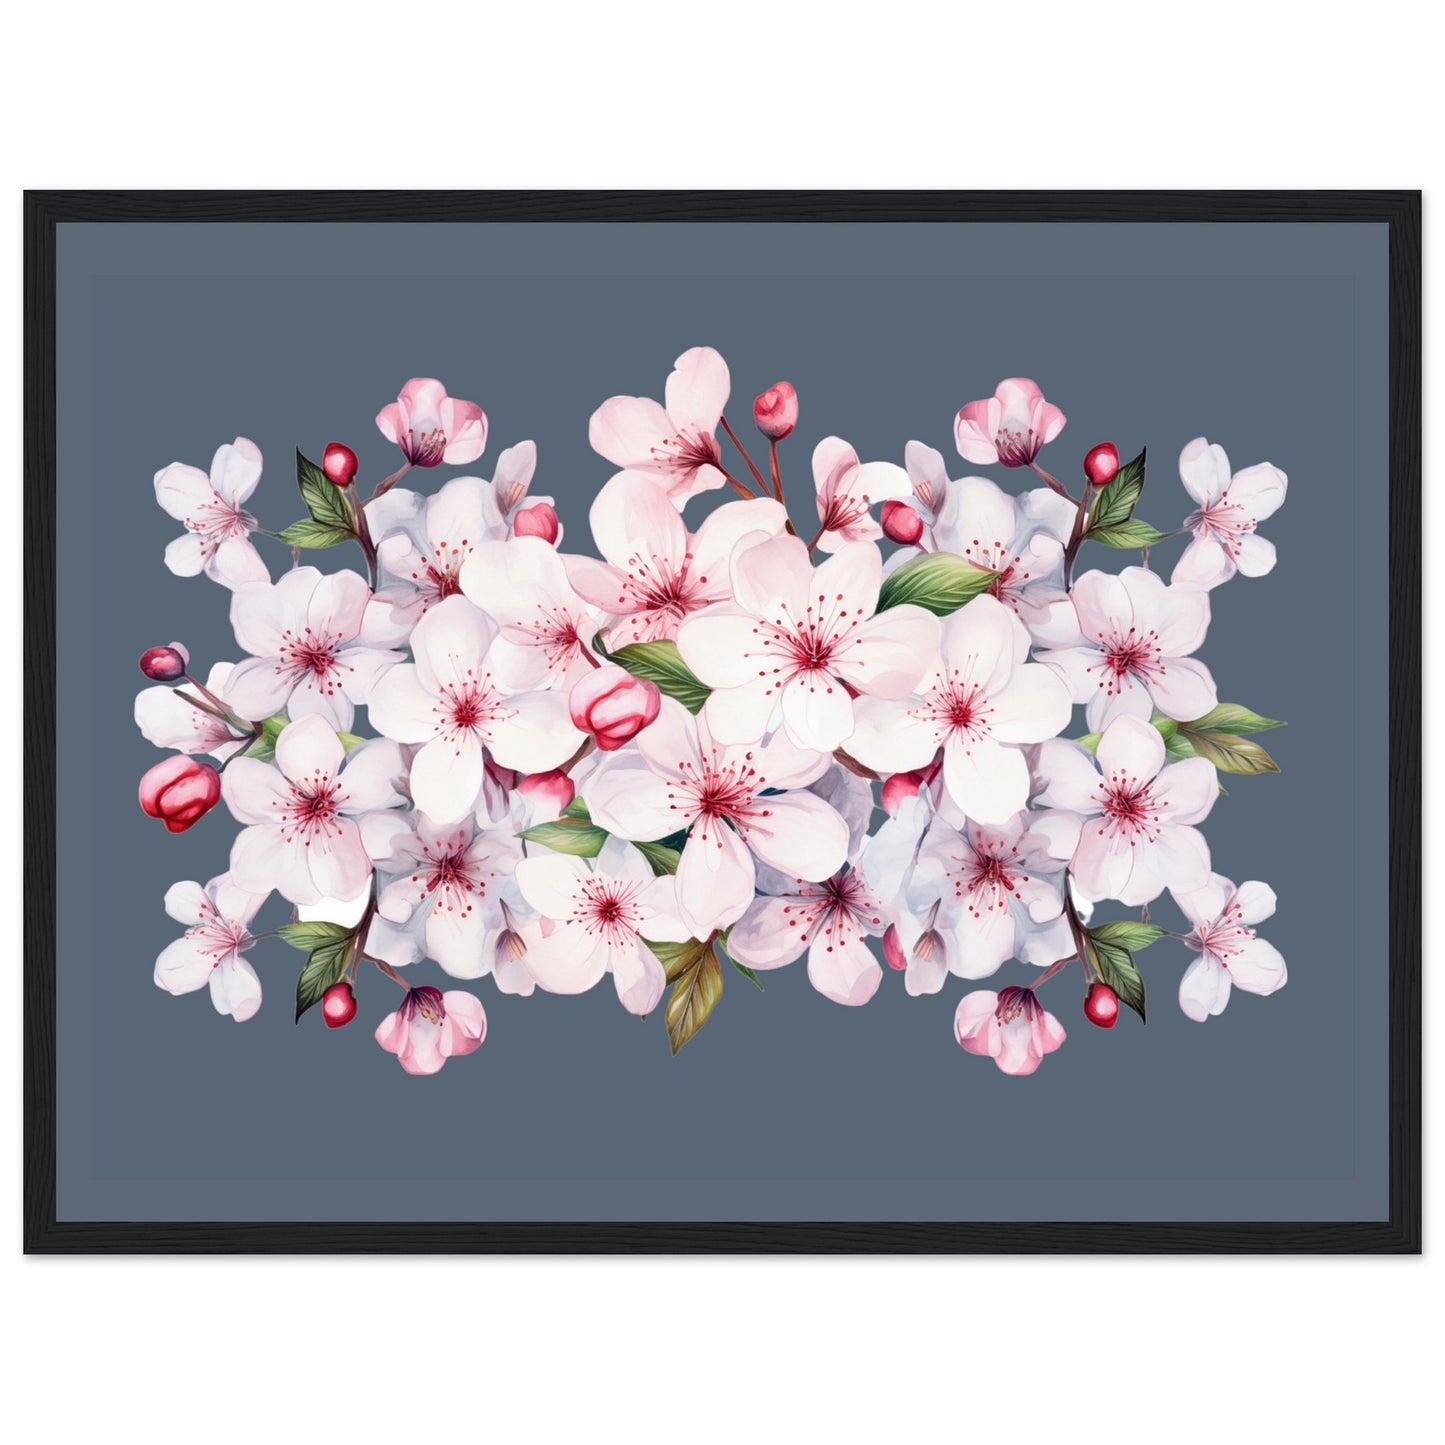 CHERRY BLOSSOMS No. 2 in BLUE Background - Premium Matte Paper Wooden Framed Poster